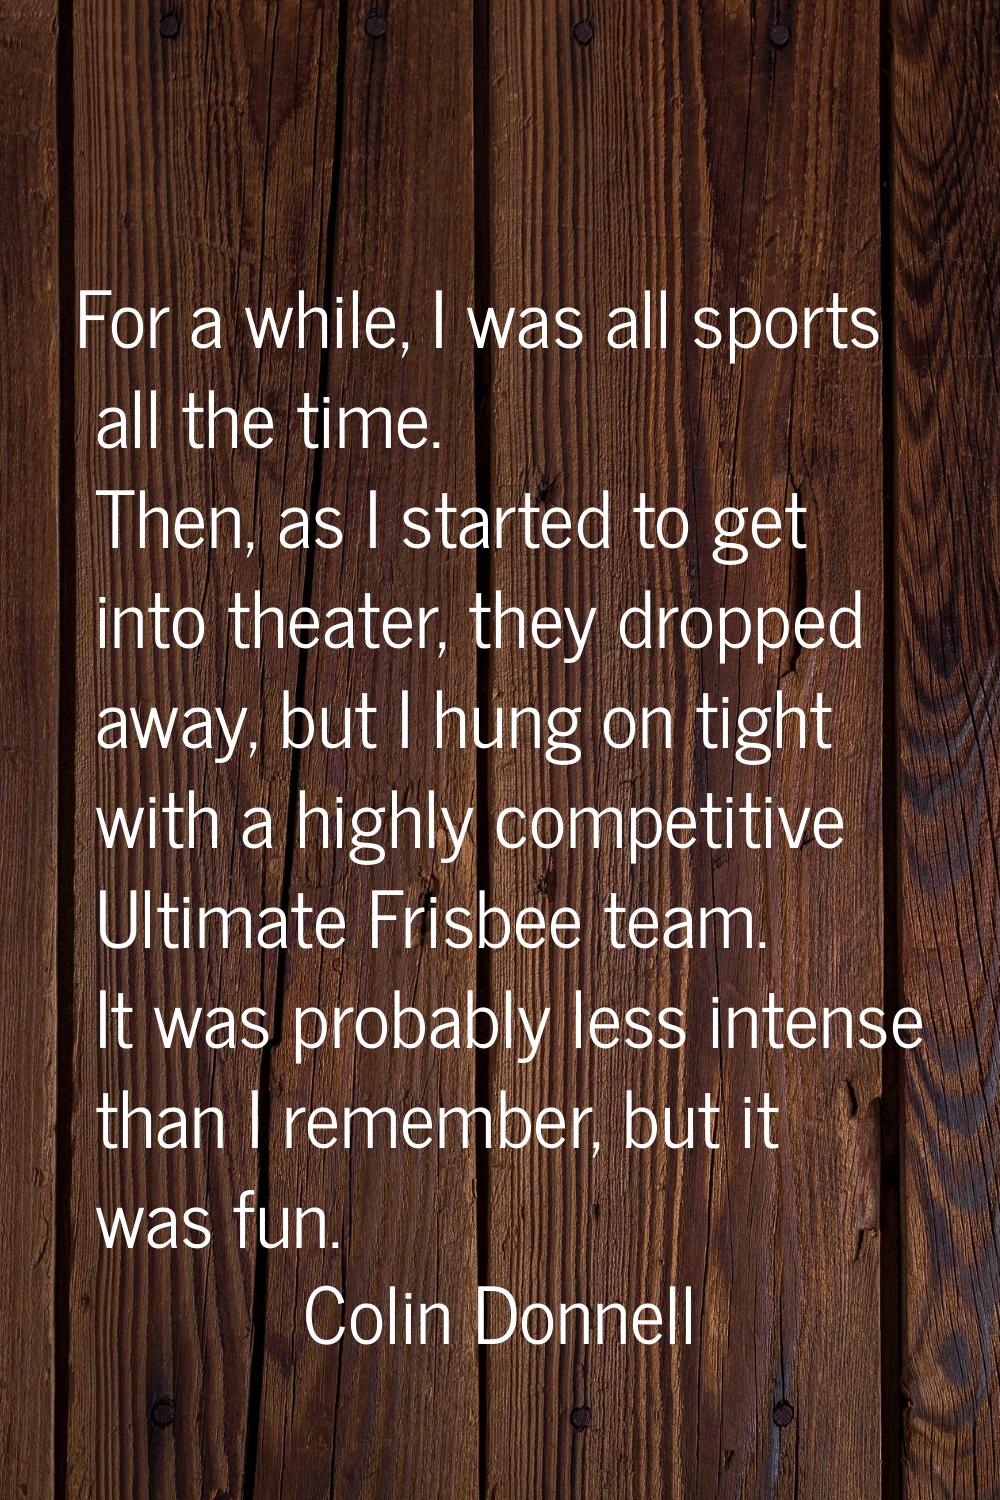 For a while, I was all sports all the time. Then, as I started to get into theater, they dropped aw